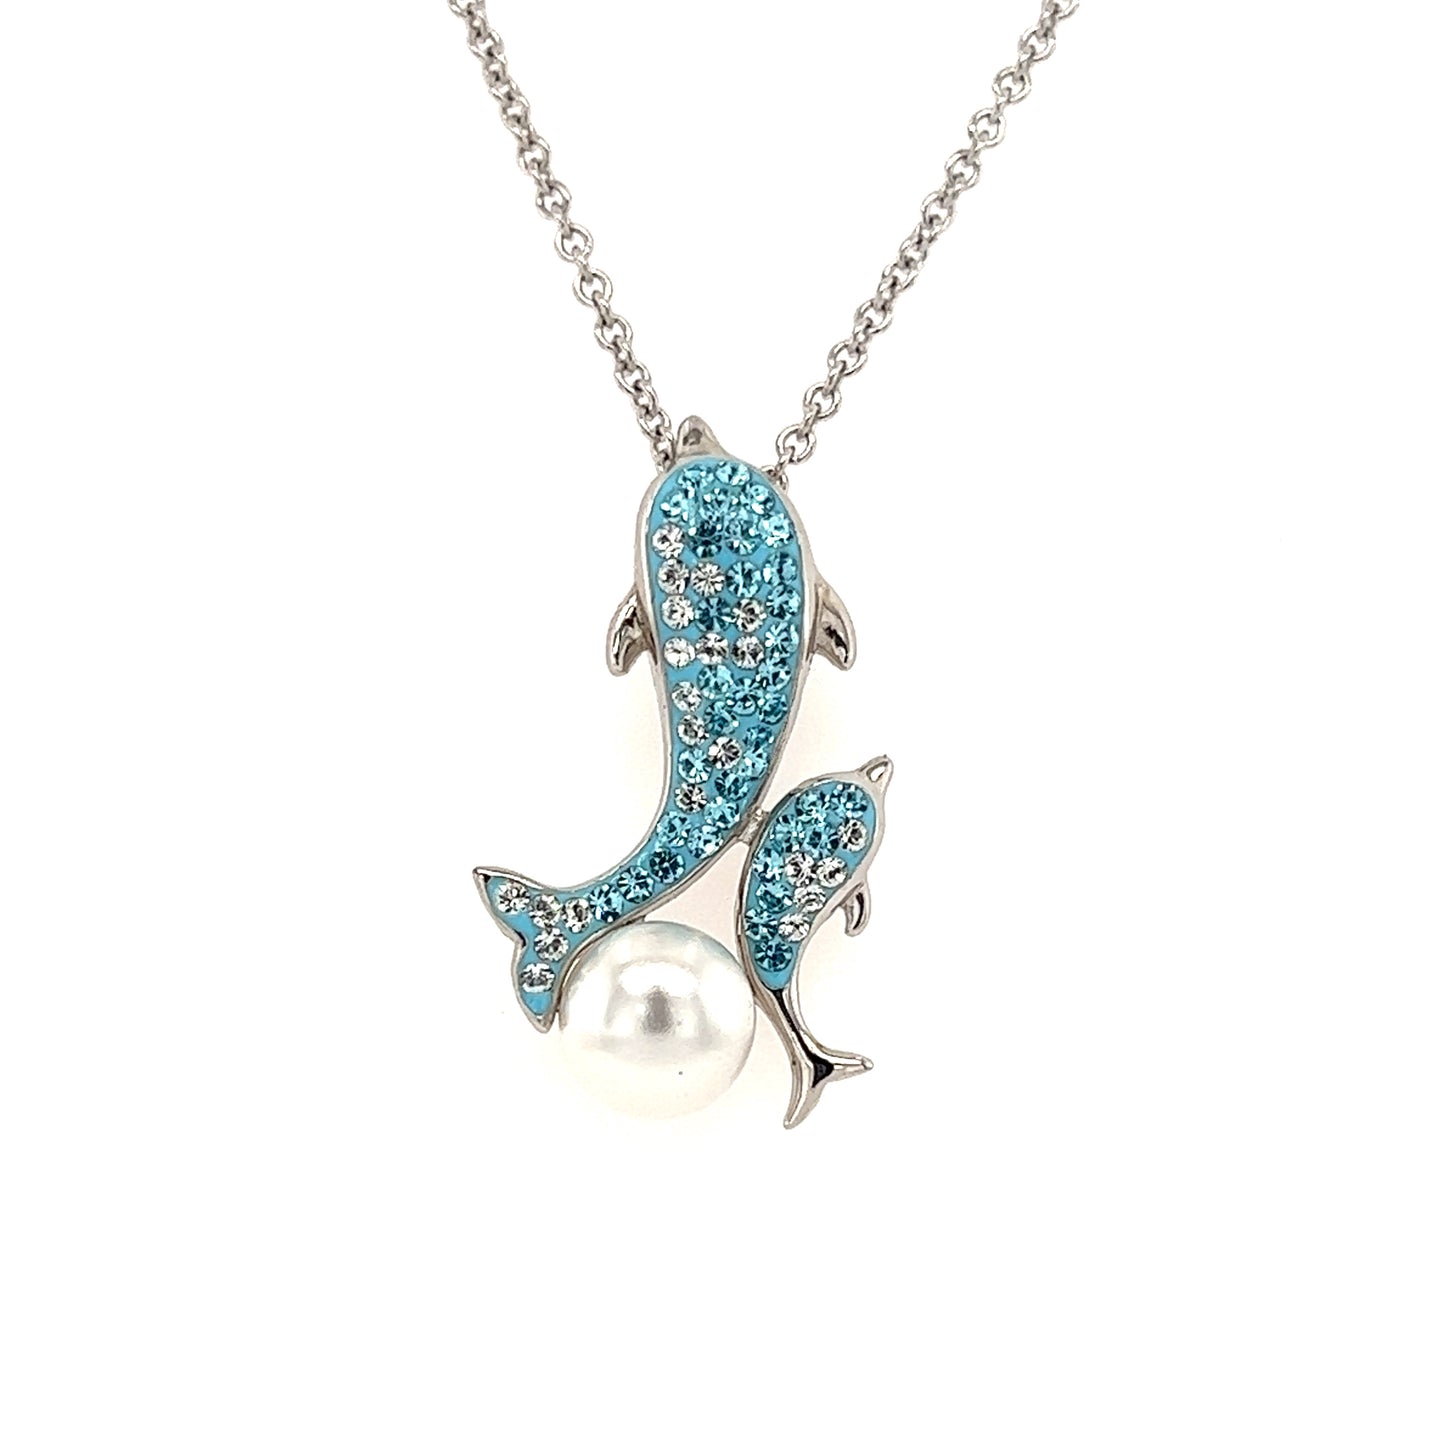 Blue Dolphins Necklace with White Pearl and Crystals in Sterling Silver Pendant View